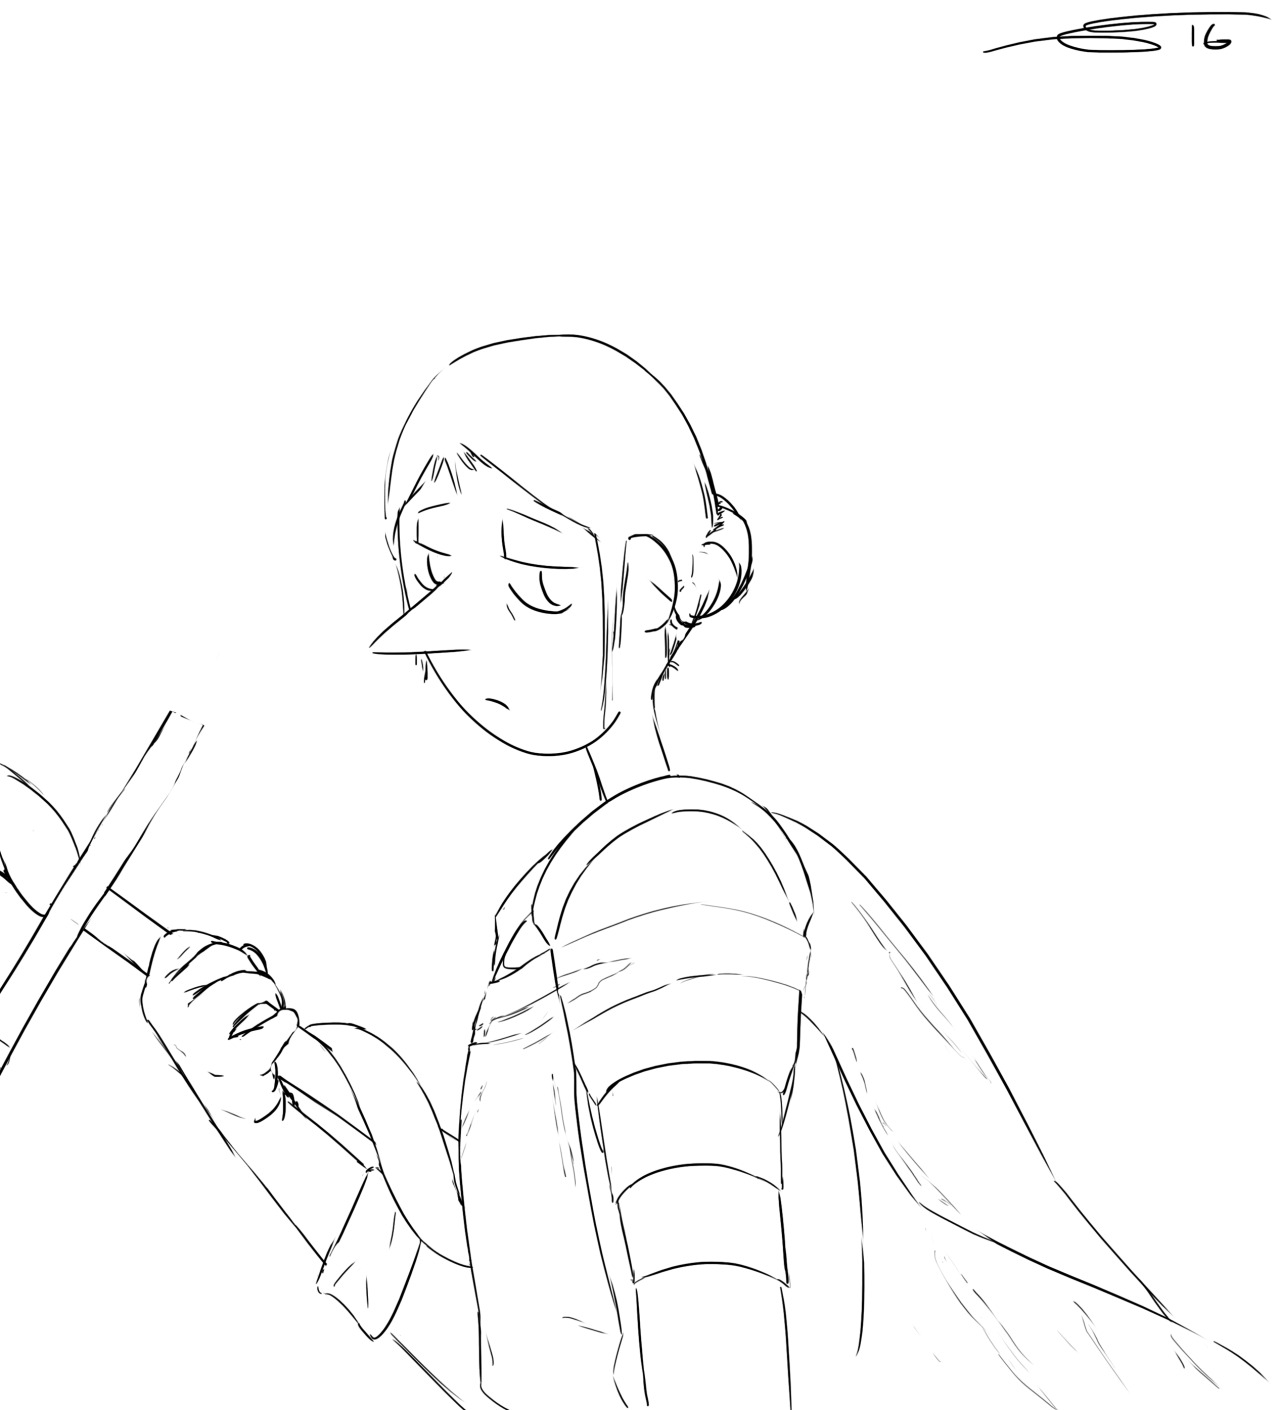 freelancer960:  A little SU X dark souls comic I might add colour at a later date,